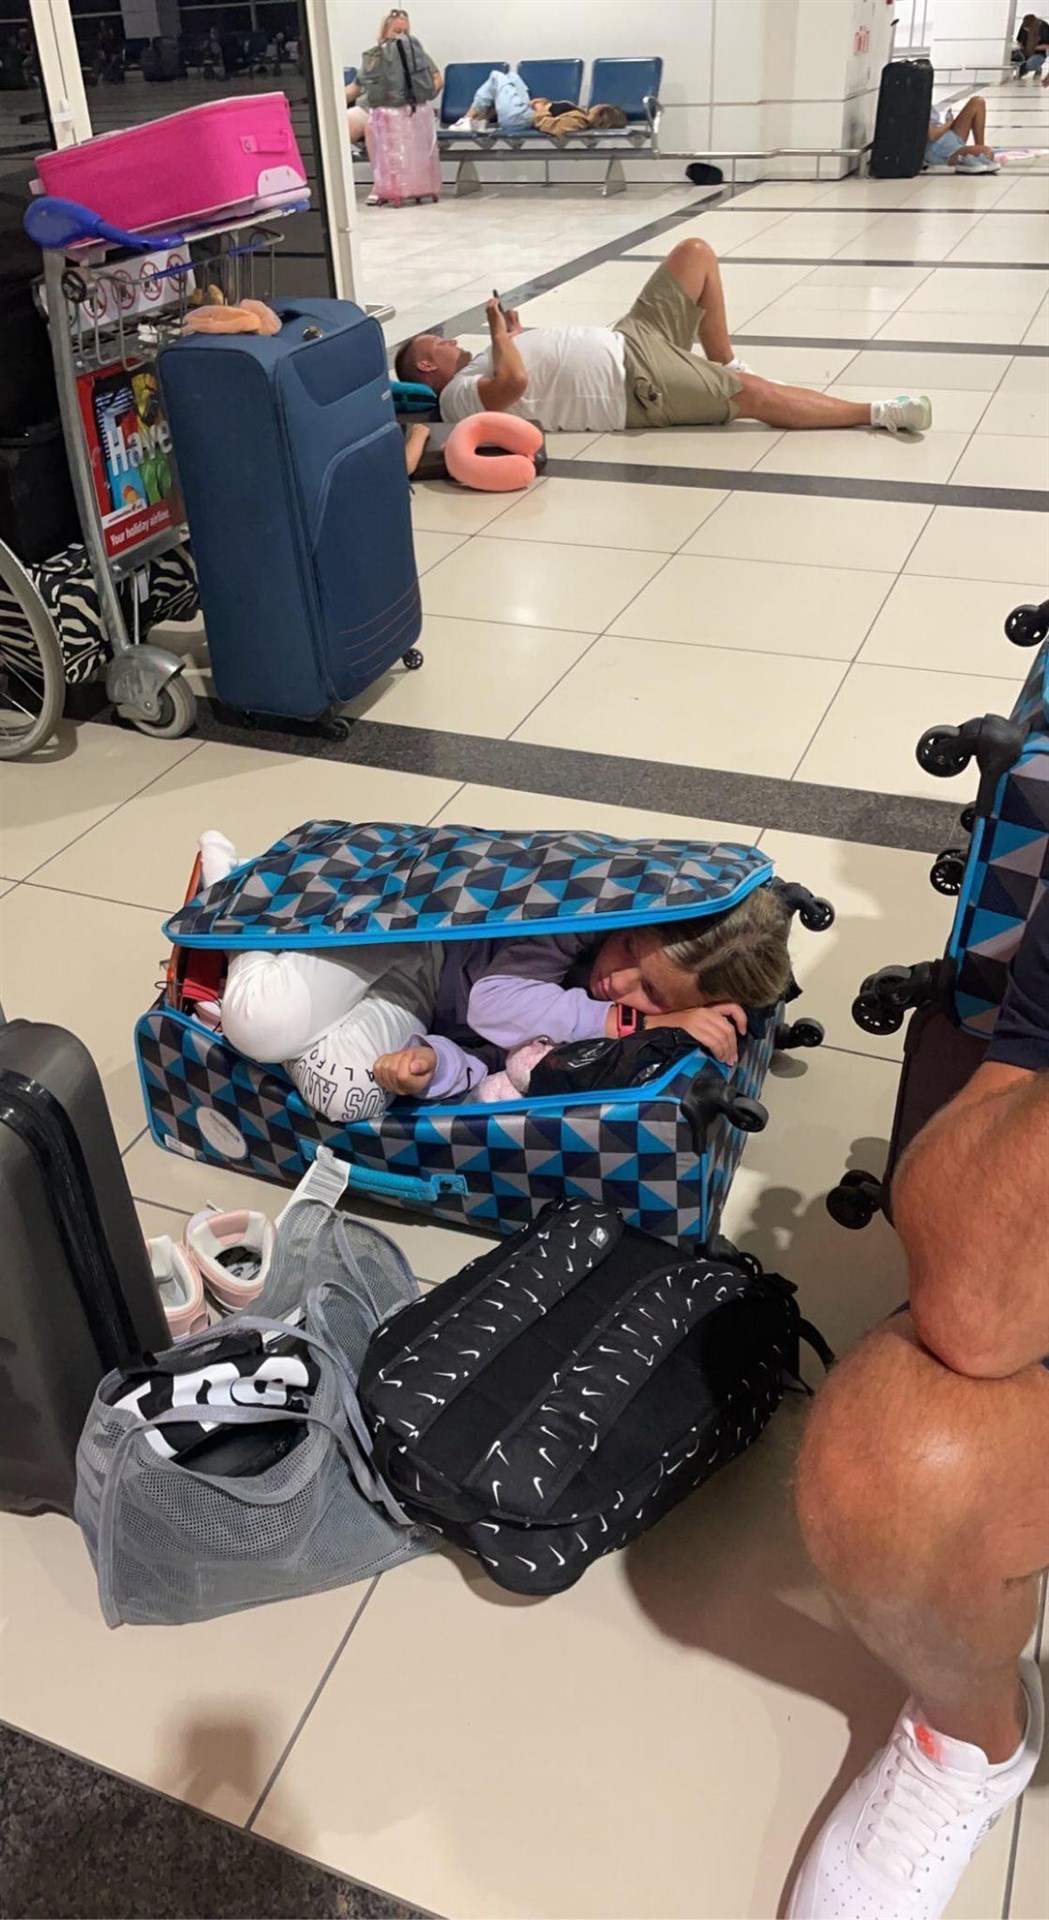 A young girl was forced to sleep in a suitcase at Antalya Airport.